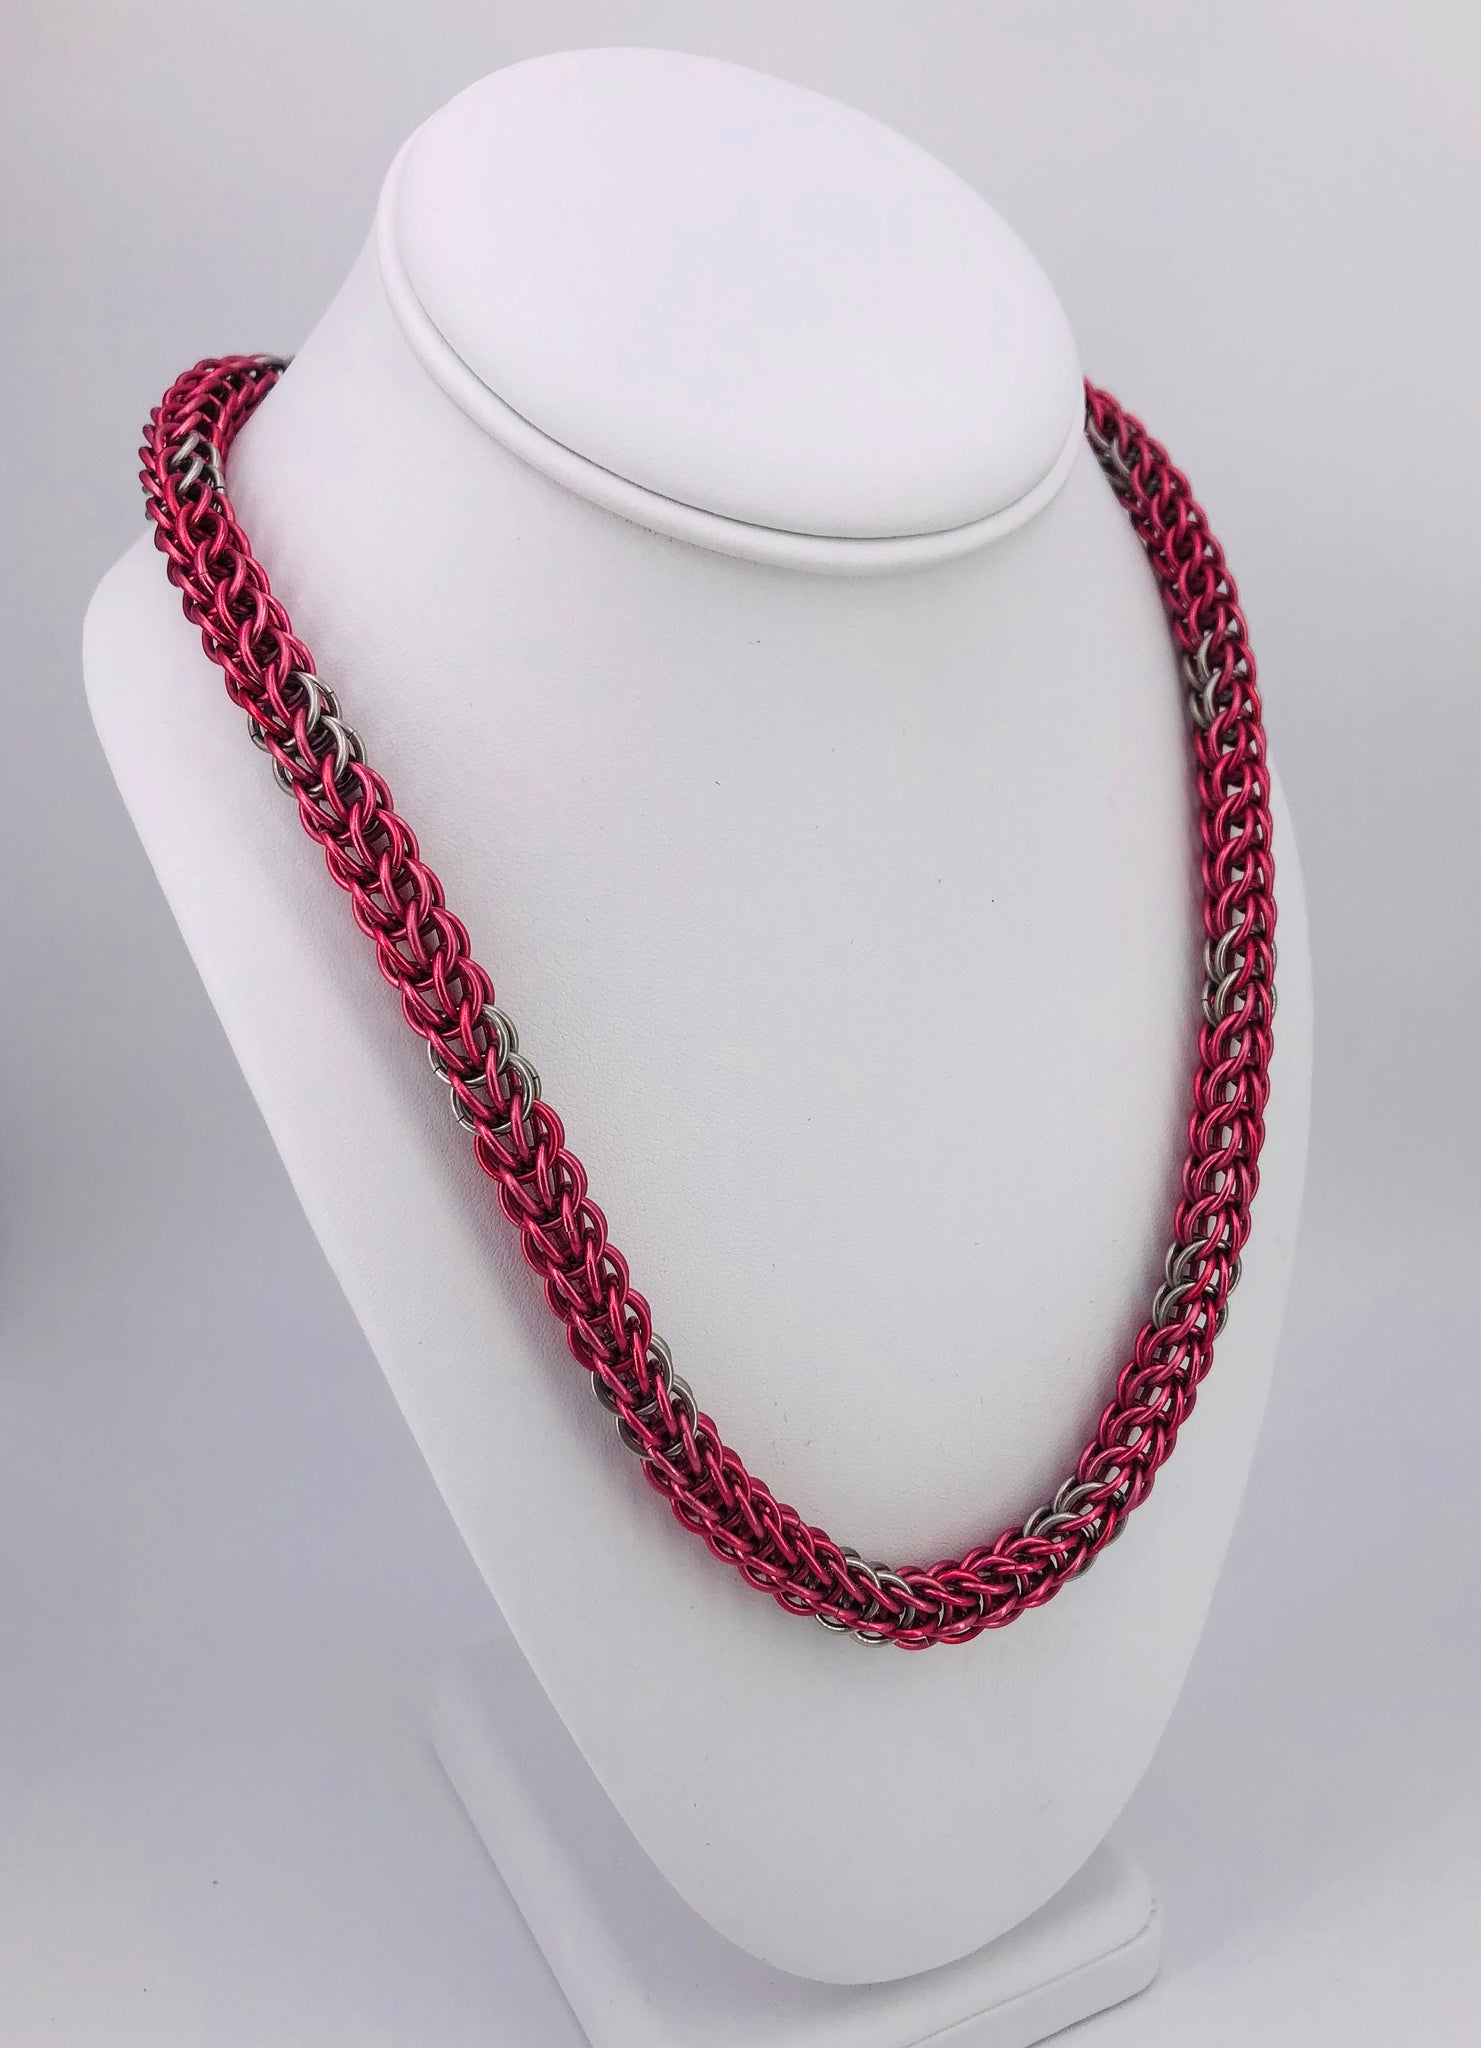 Pink and Stainless Steel Chainmaille Necklace Collar